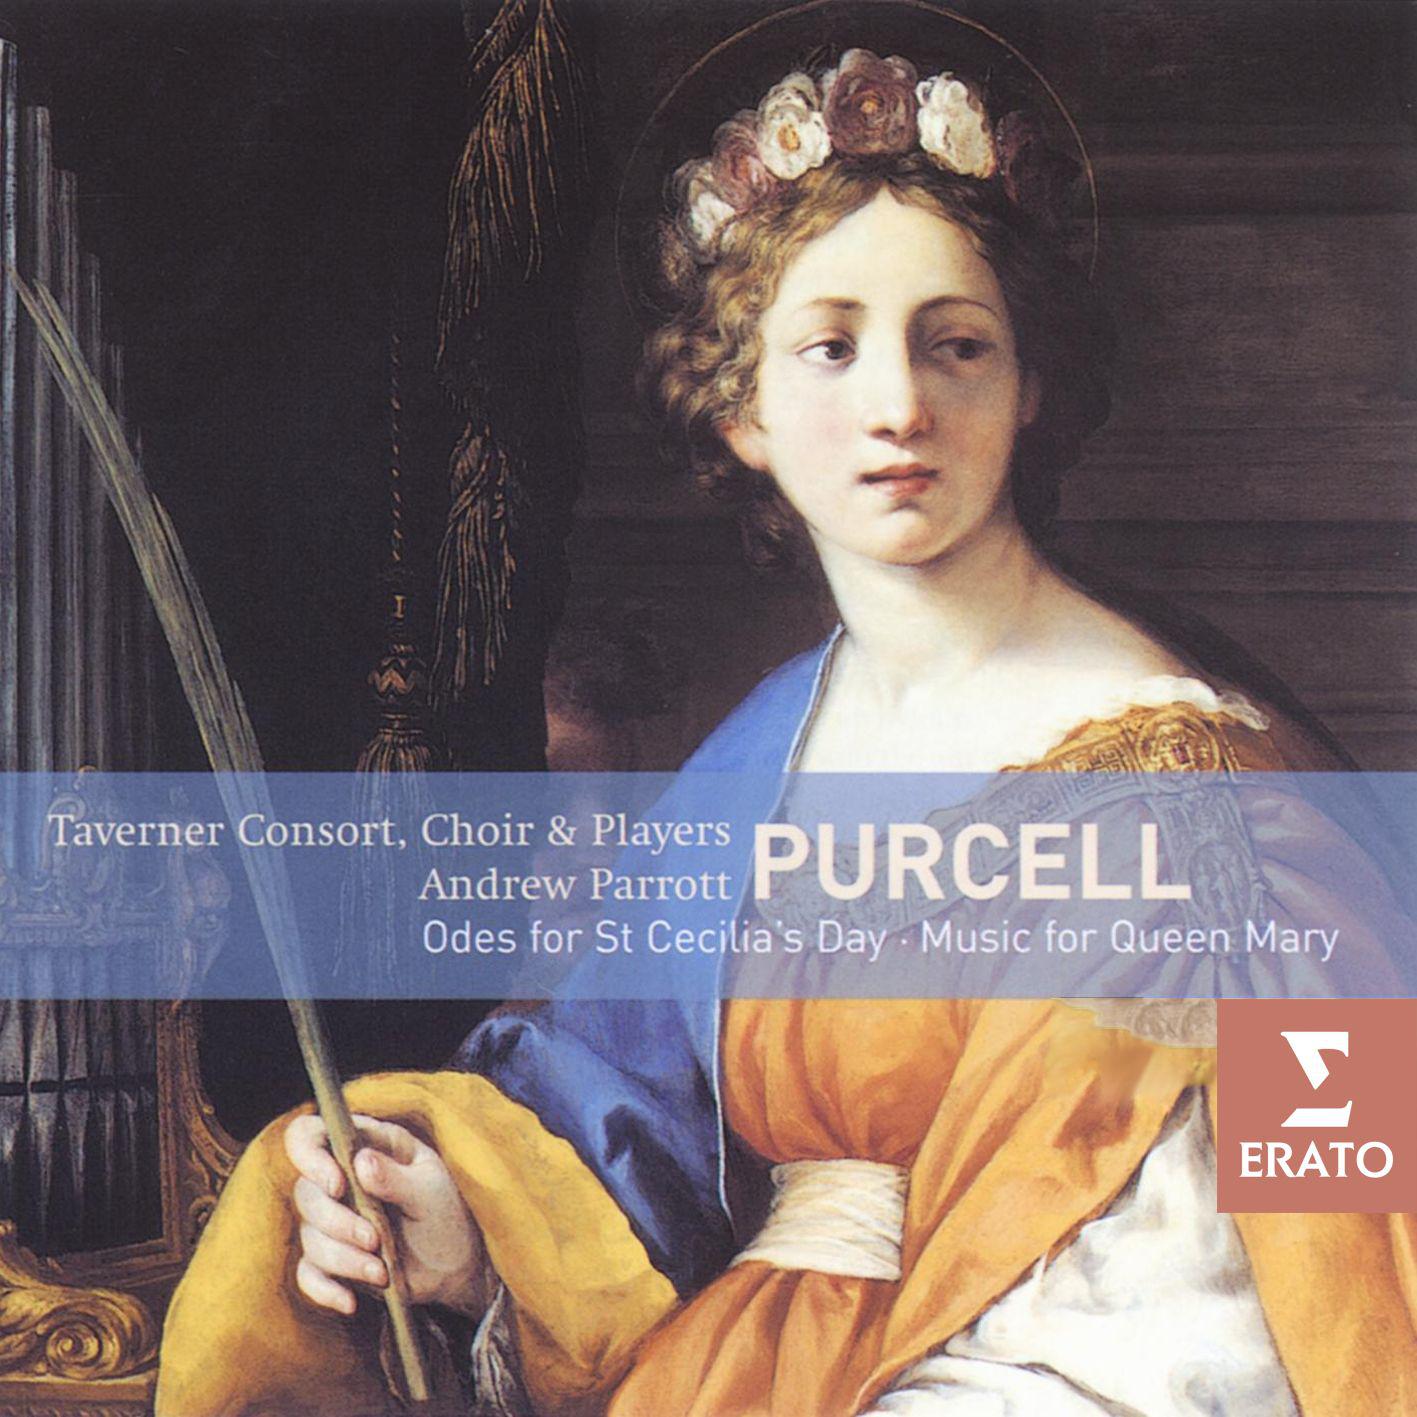 St Cecilia's Day Ode, 'Welcome to all the pleasures' Z339:In a consort of voices